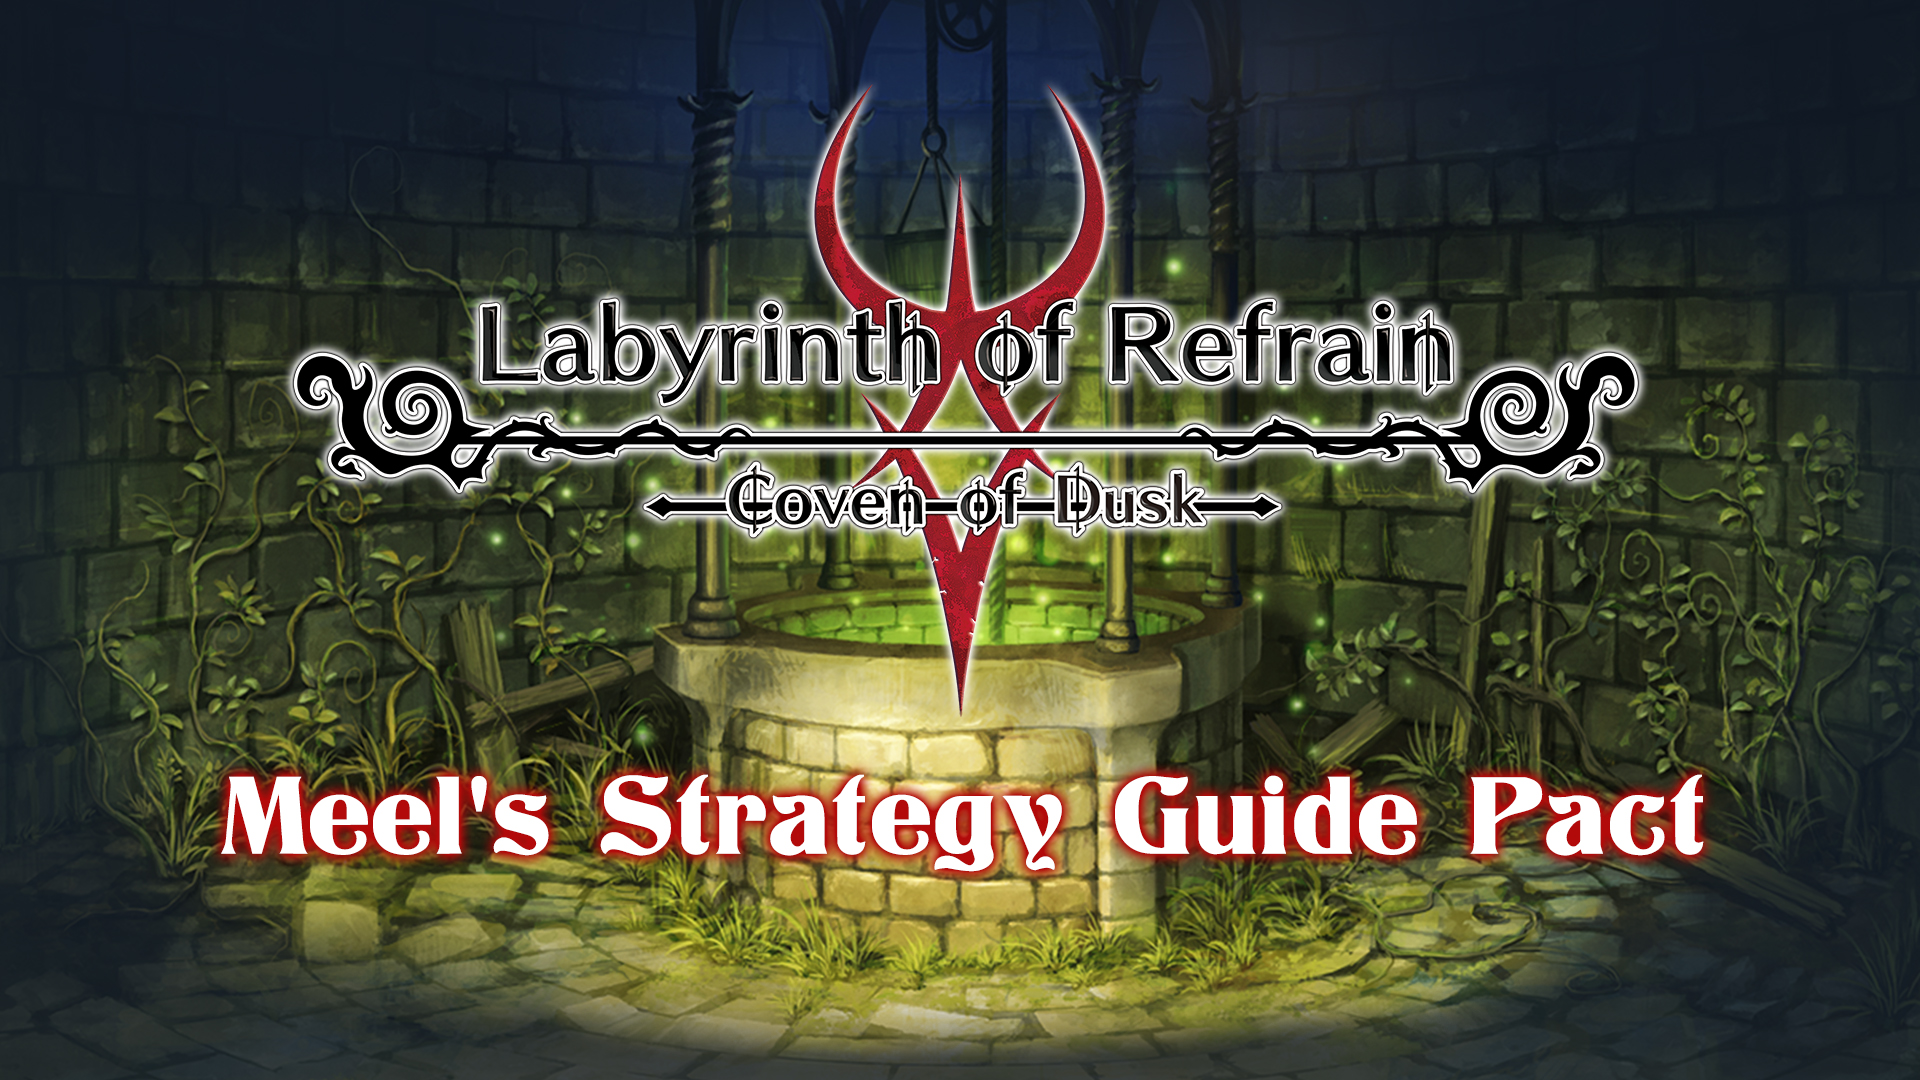 Labyrinth of Refrain: Coven of Dusk - Meel's Strategy Guide Pact Featured Screenshot #1